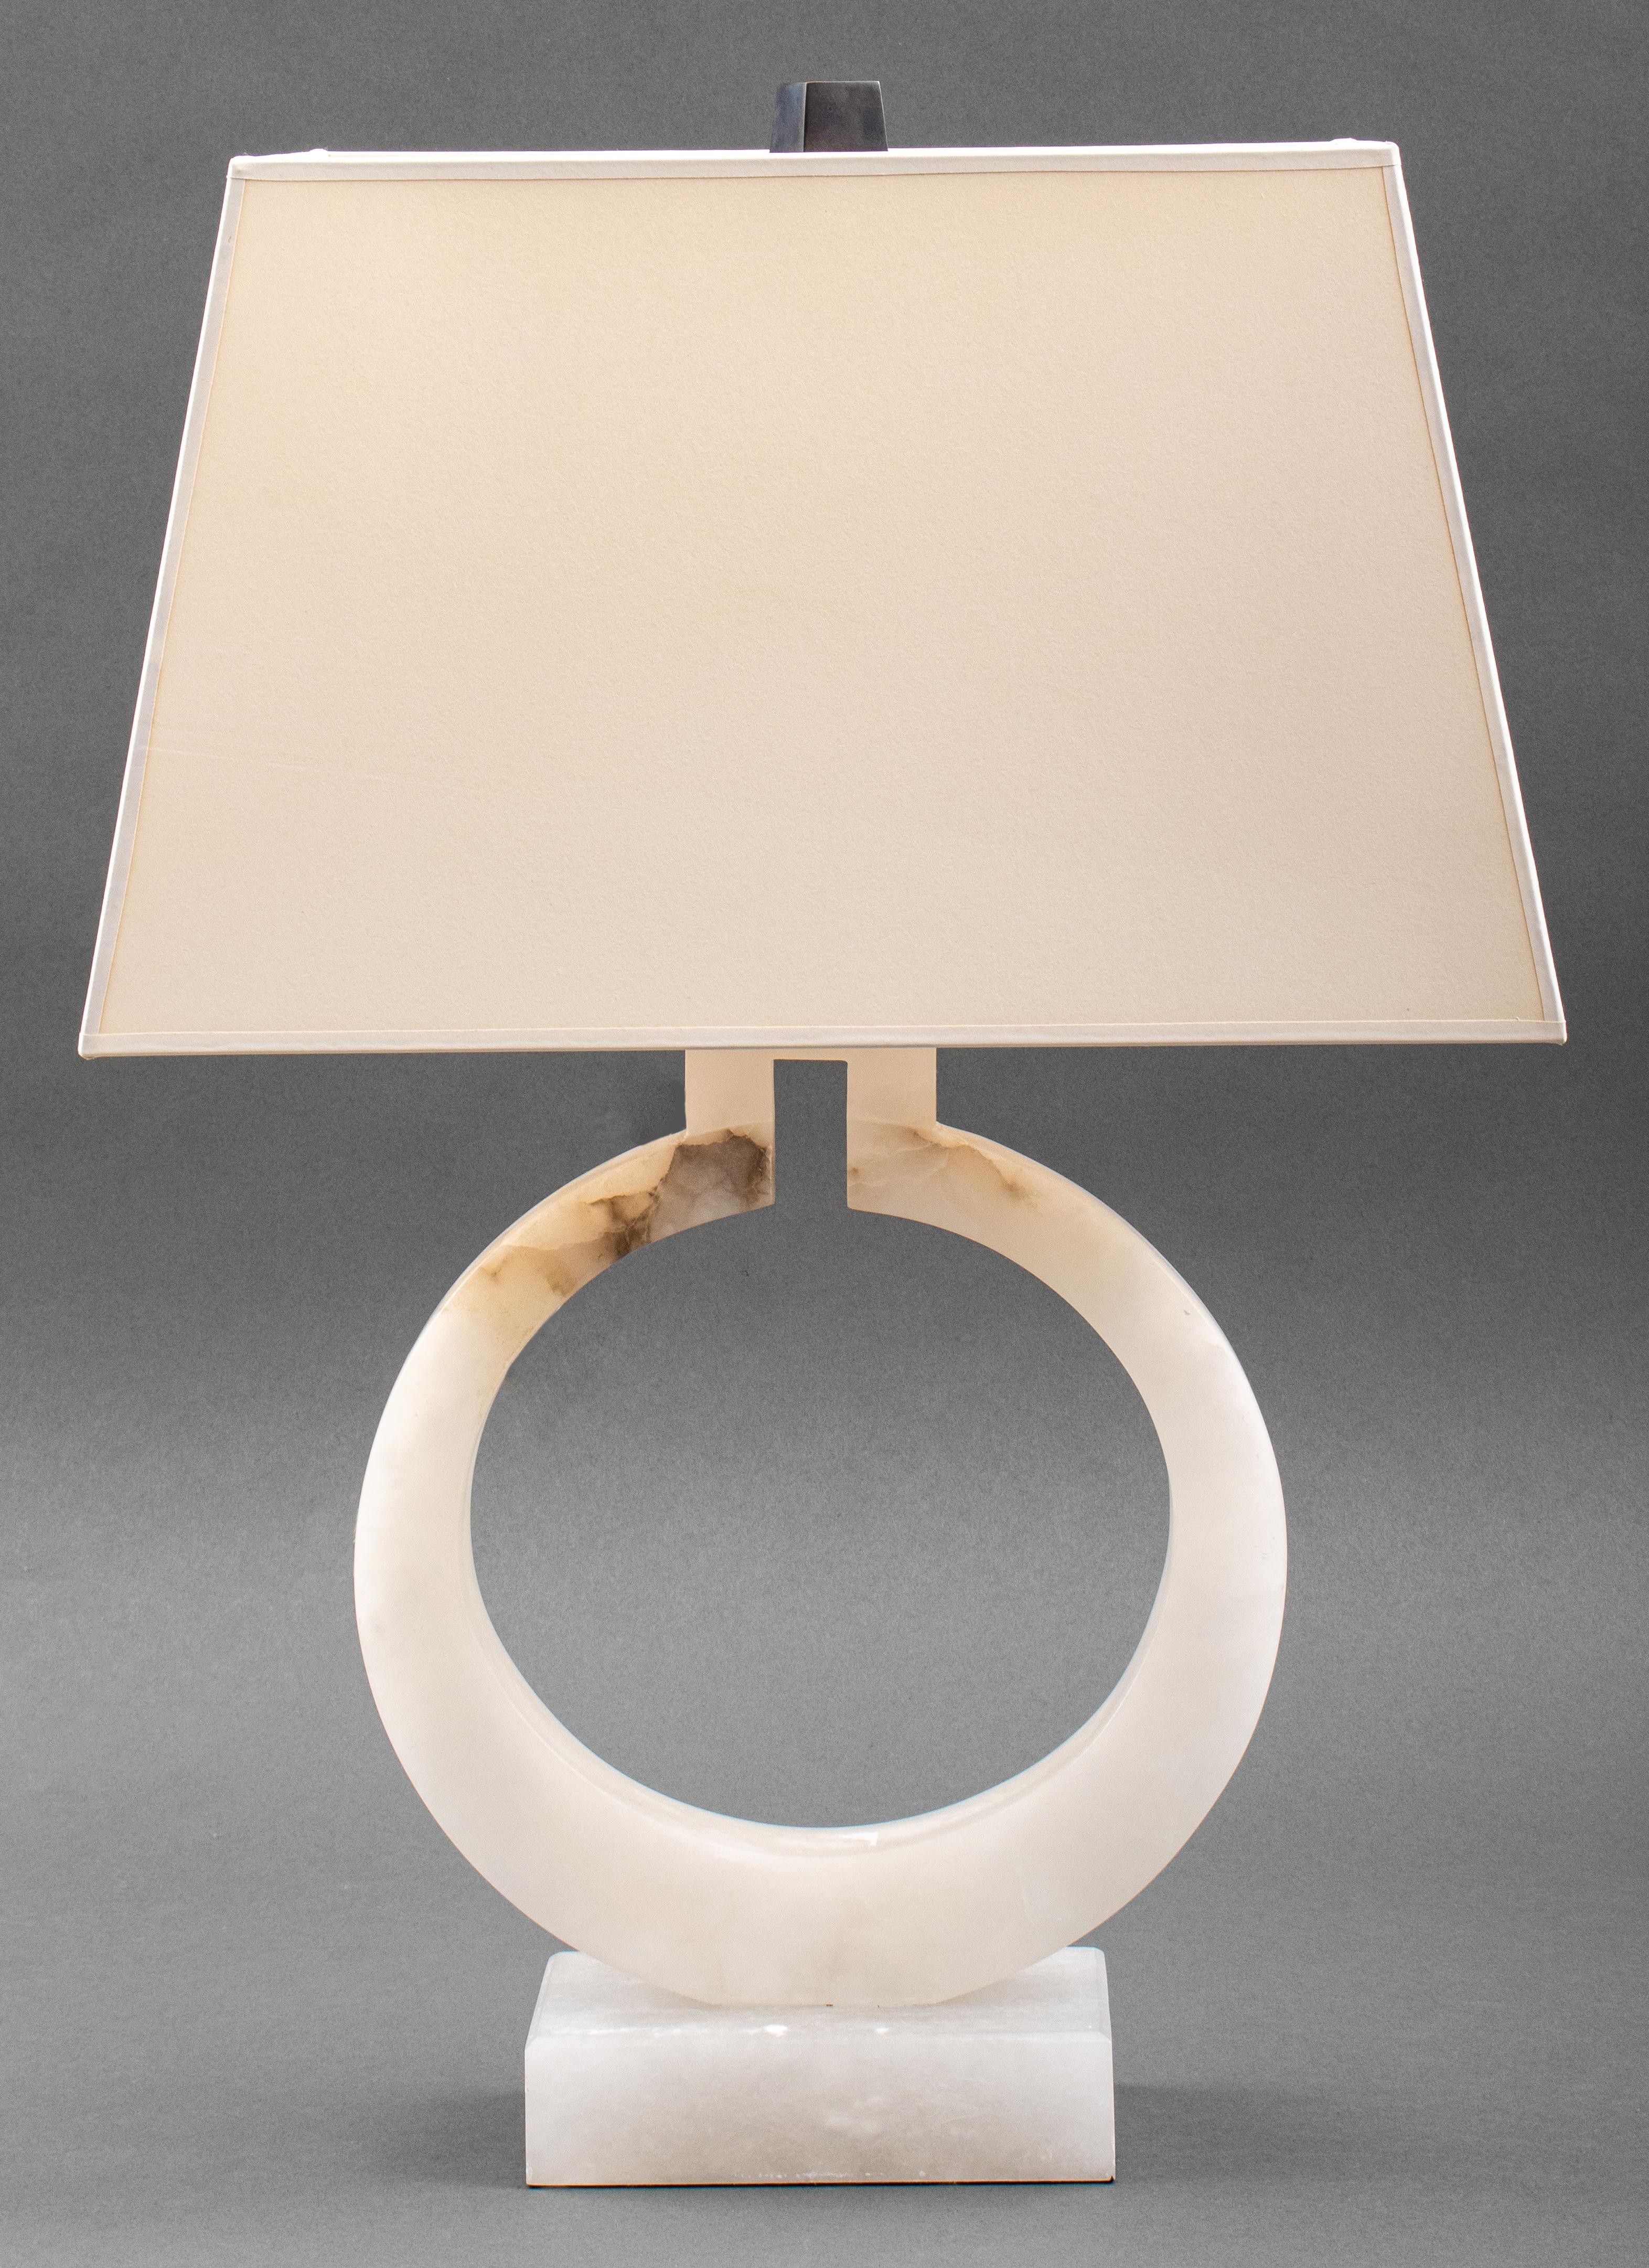 Madison alabaster table lamp of ring-form mounted on a slim rectangular base, fitted with a white lampshade and topped by a patinated bronze finial. 27